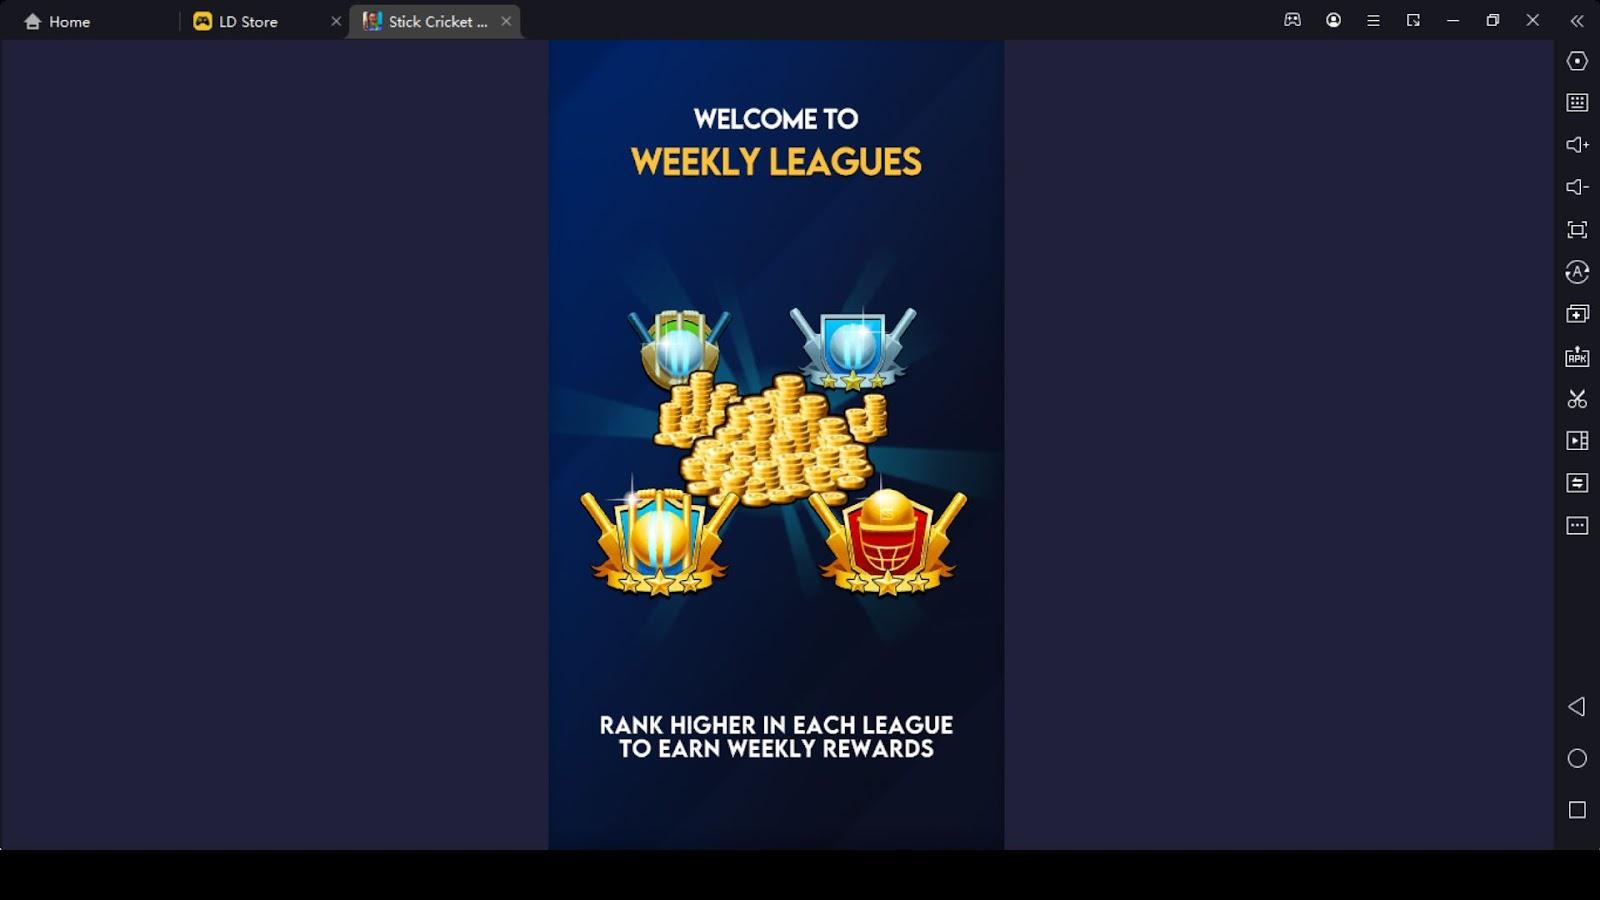 What are Weekly Leagues